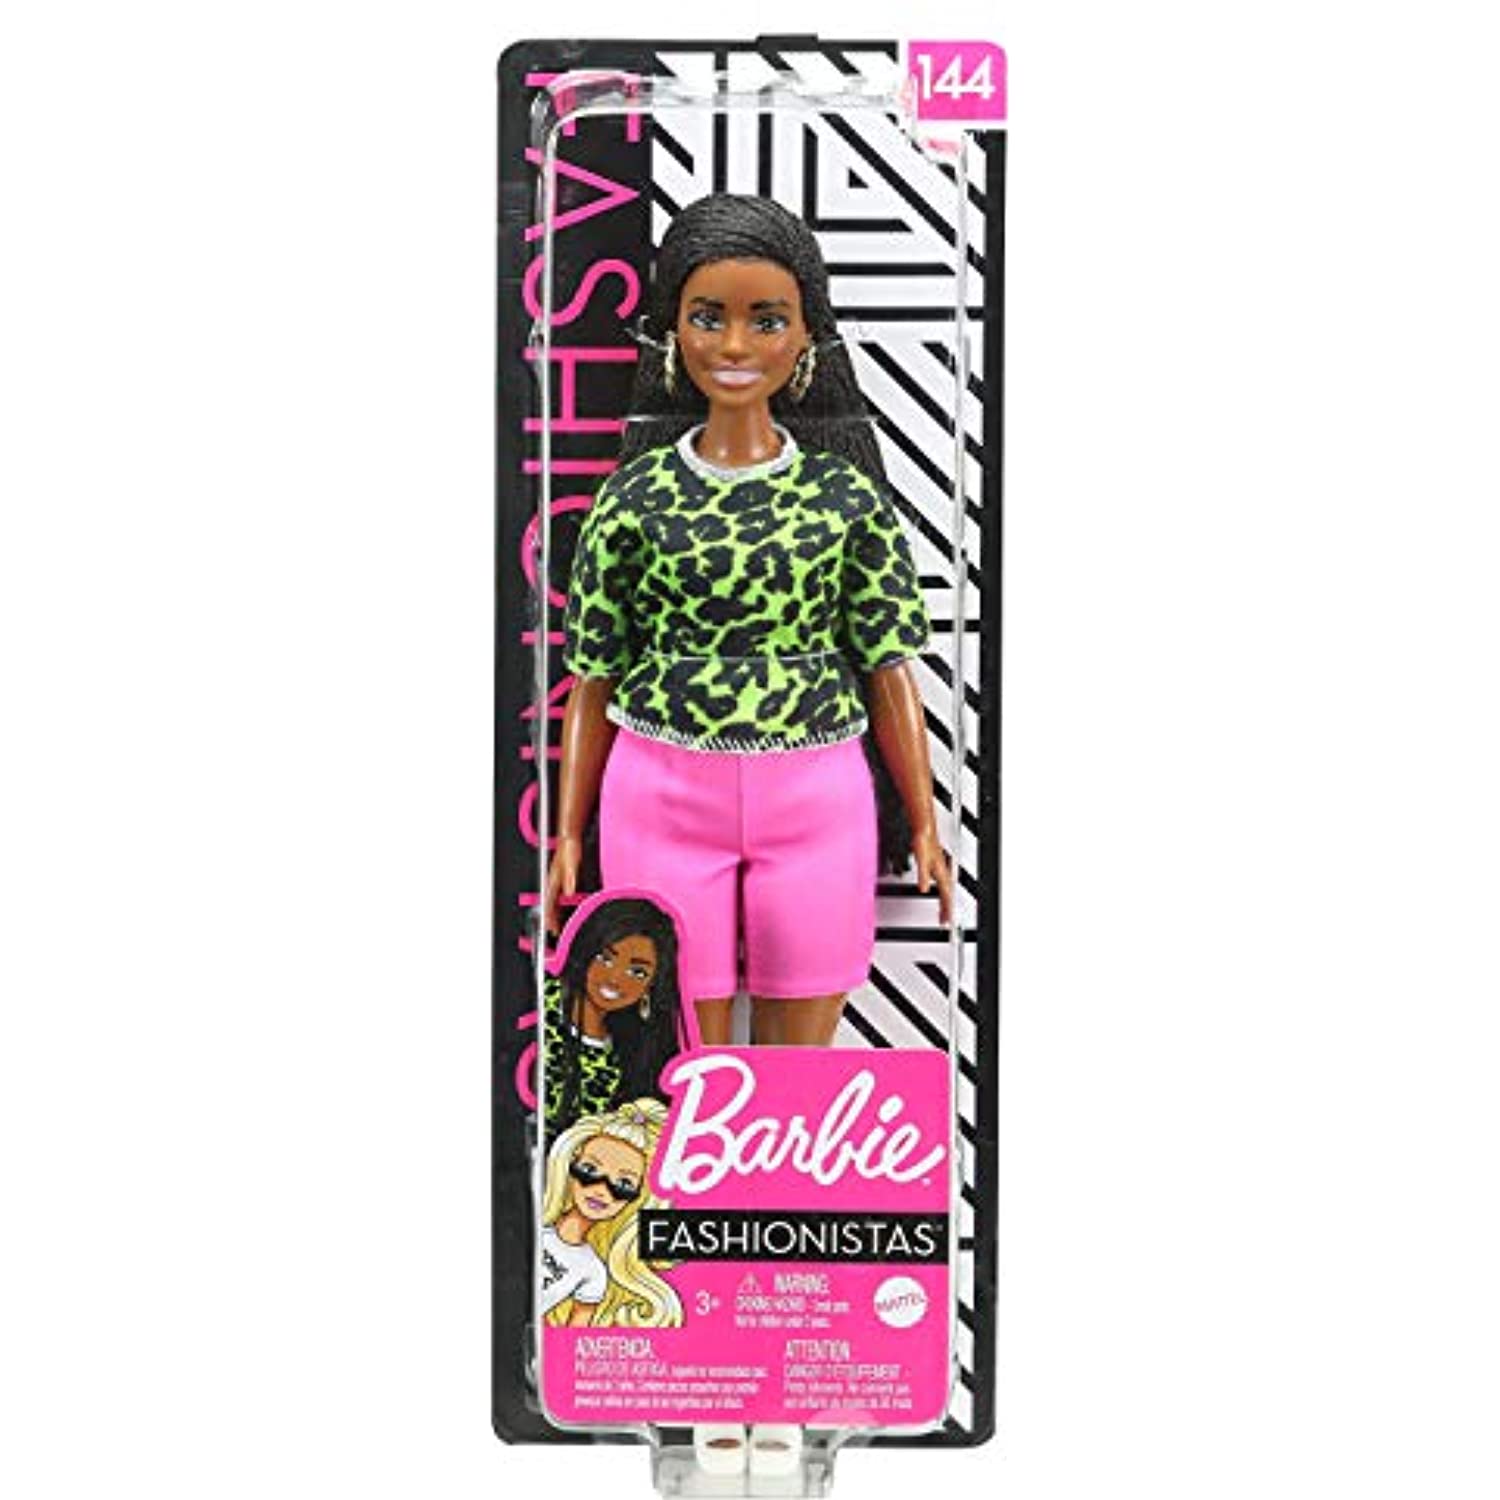 Barbie Fashionistas Doll with Long Brunette Braids Wearing Neon Green Animal-Print Top, Pink Shorts, White Sandals & Earrings, Toy for Kids 3 to 8 Years Old